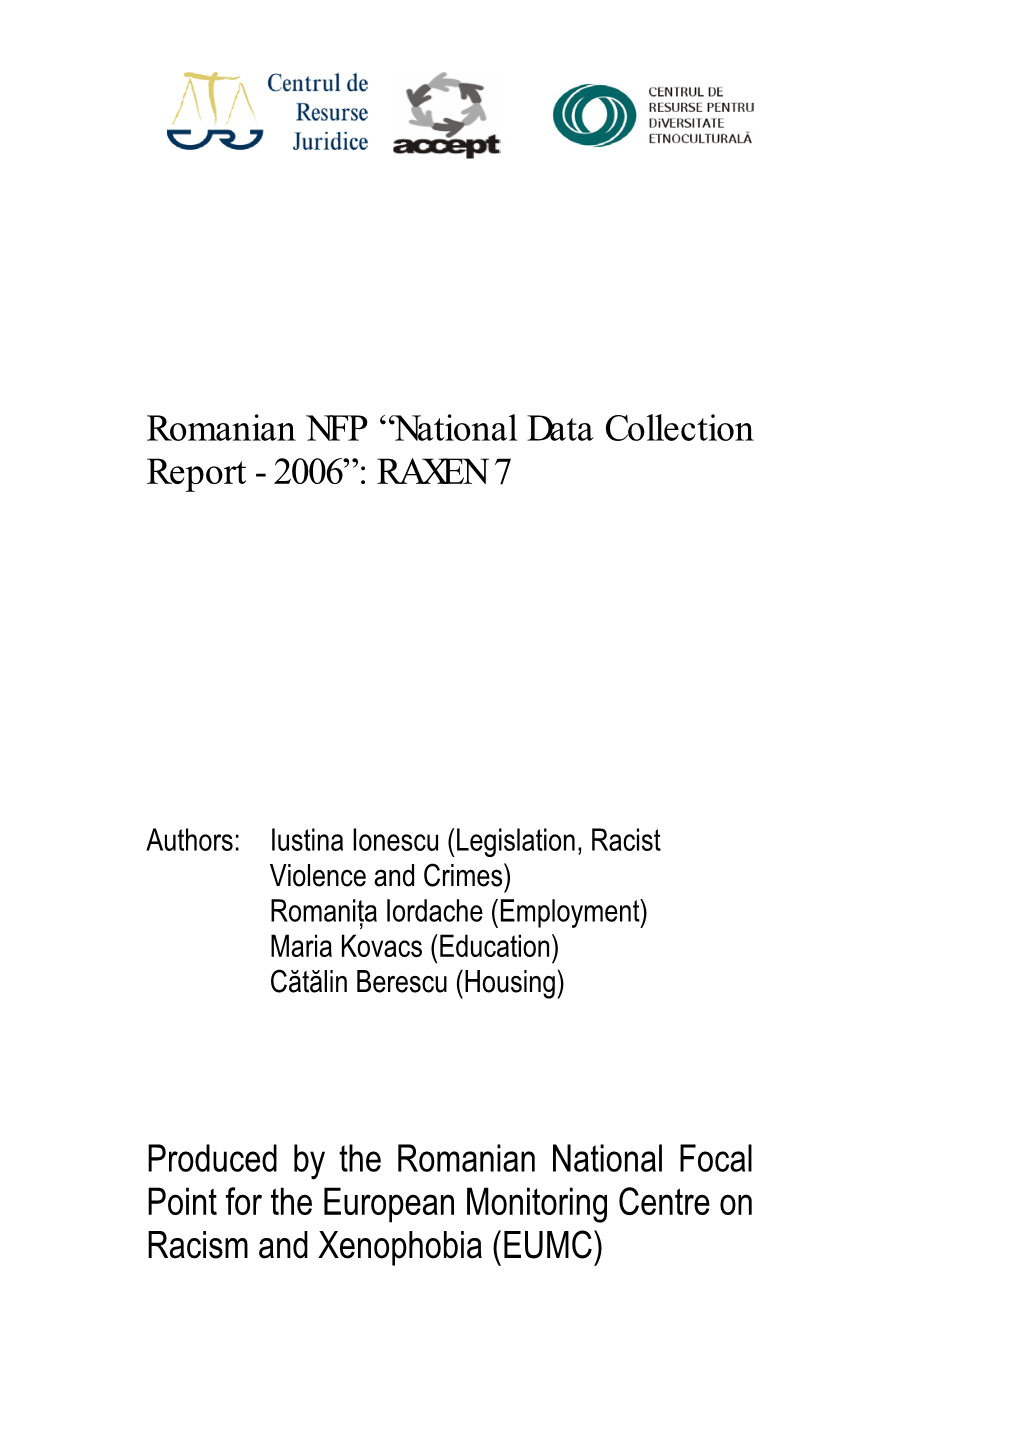 Romanian NFP RAXEN National Data Collection Report 2006